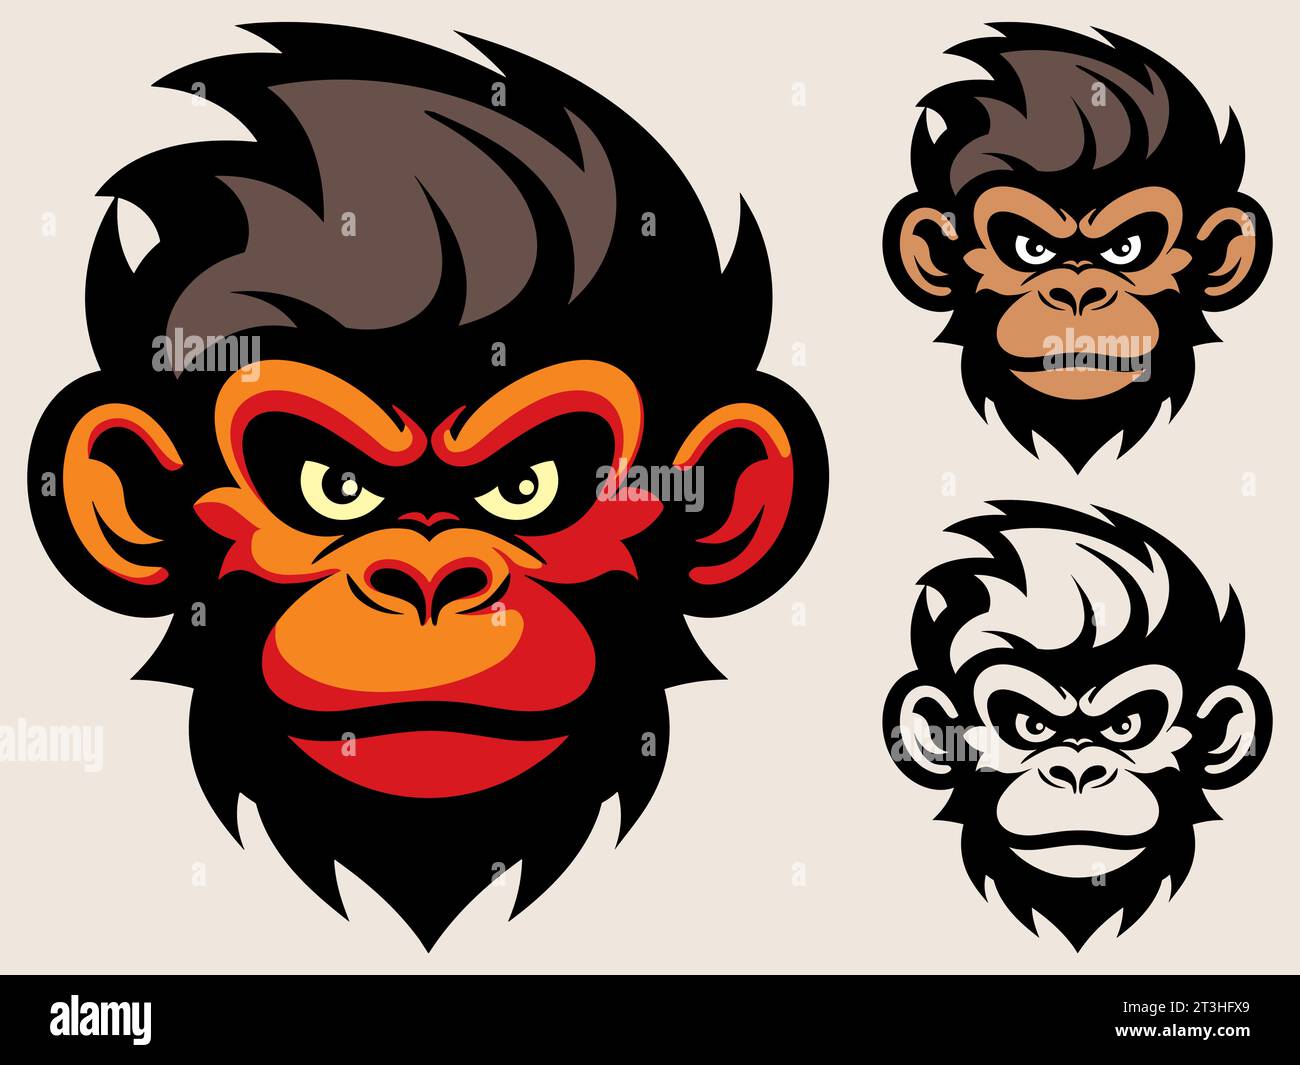 Bold mascot or logo illustration of a monkey face with fiery red and orange highlights, showcasing an intense and fierce expression. Stock Vector